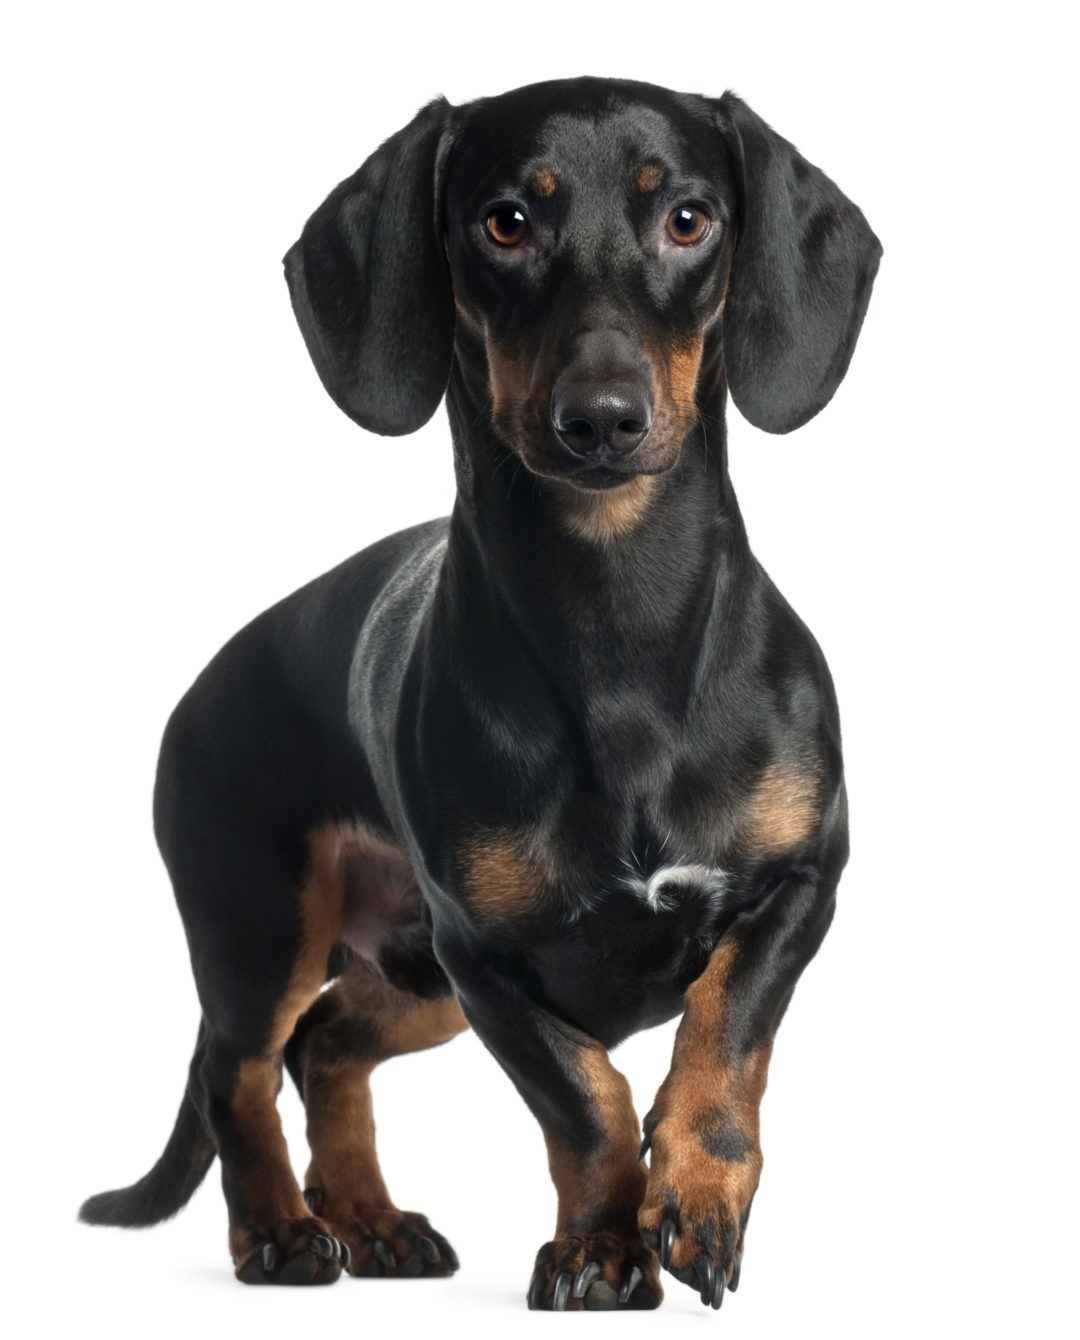 Signs of Intervertebral disc disease (IVDD) in Dachshunds